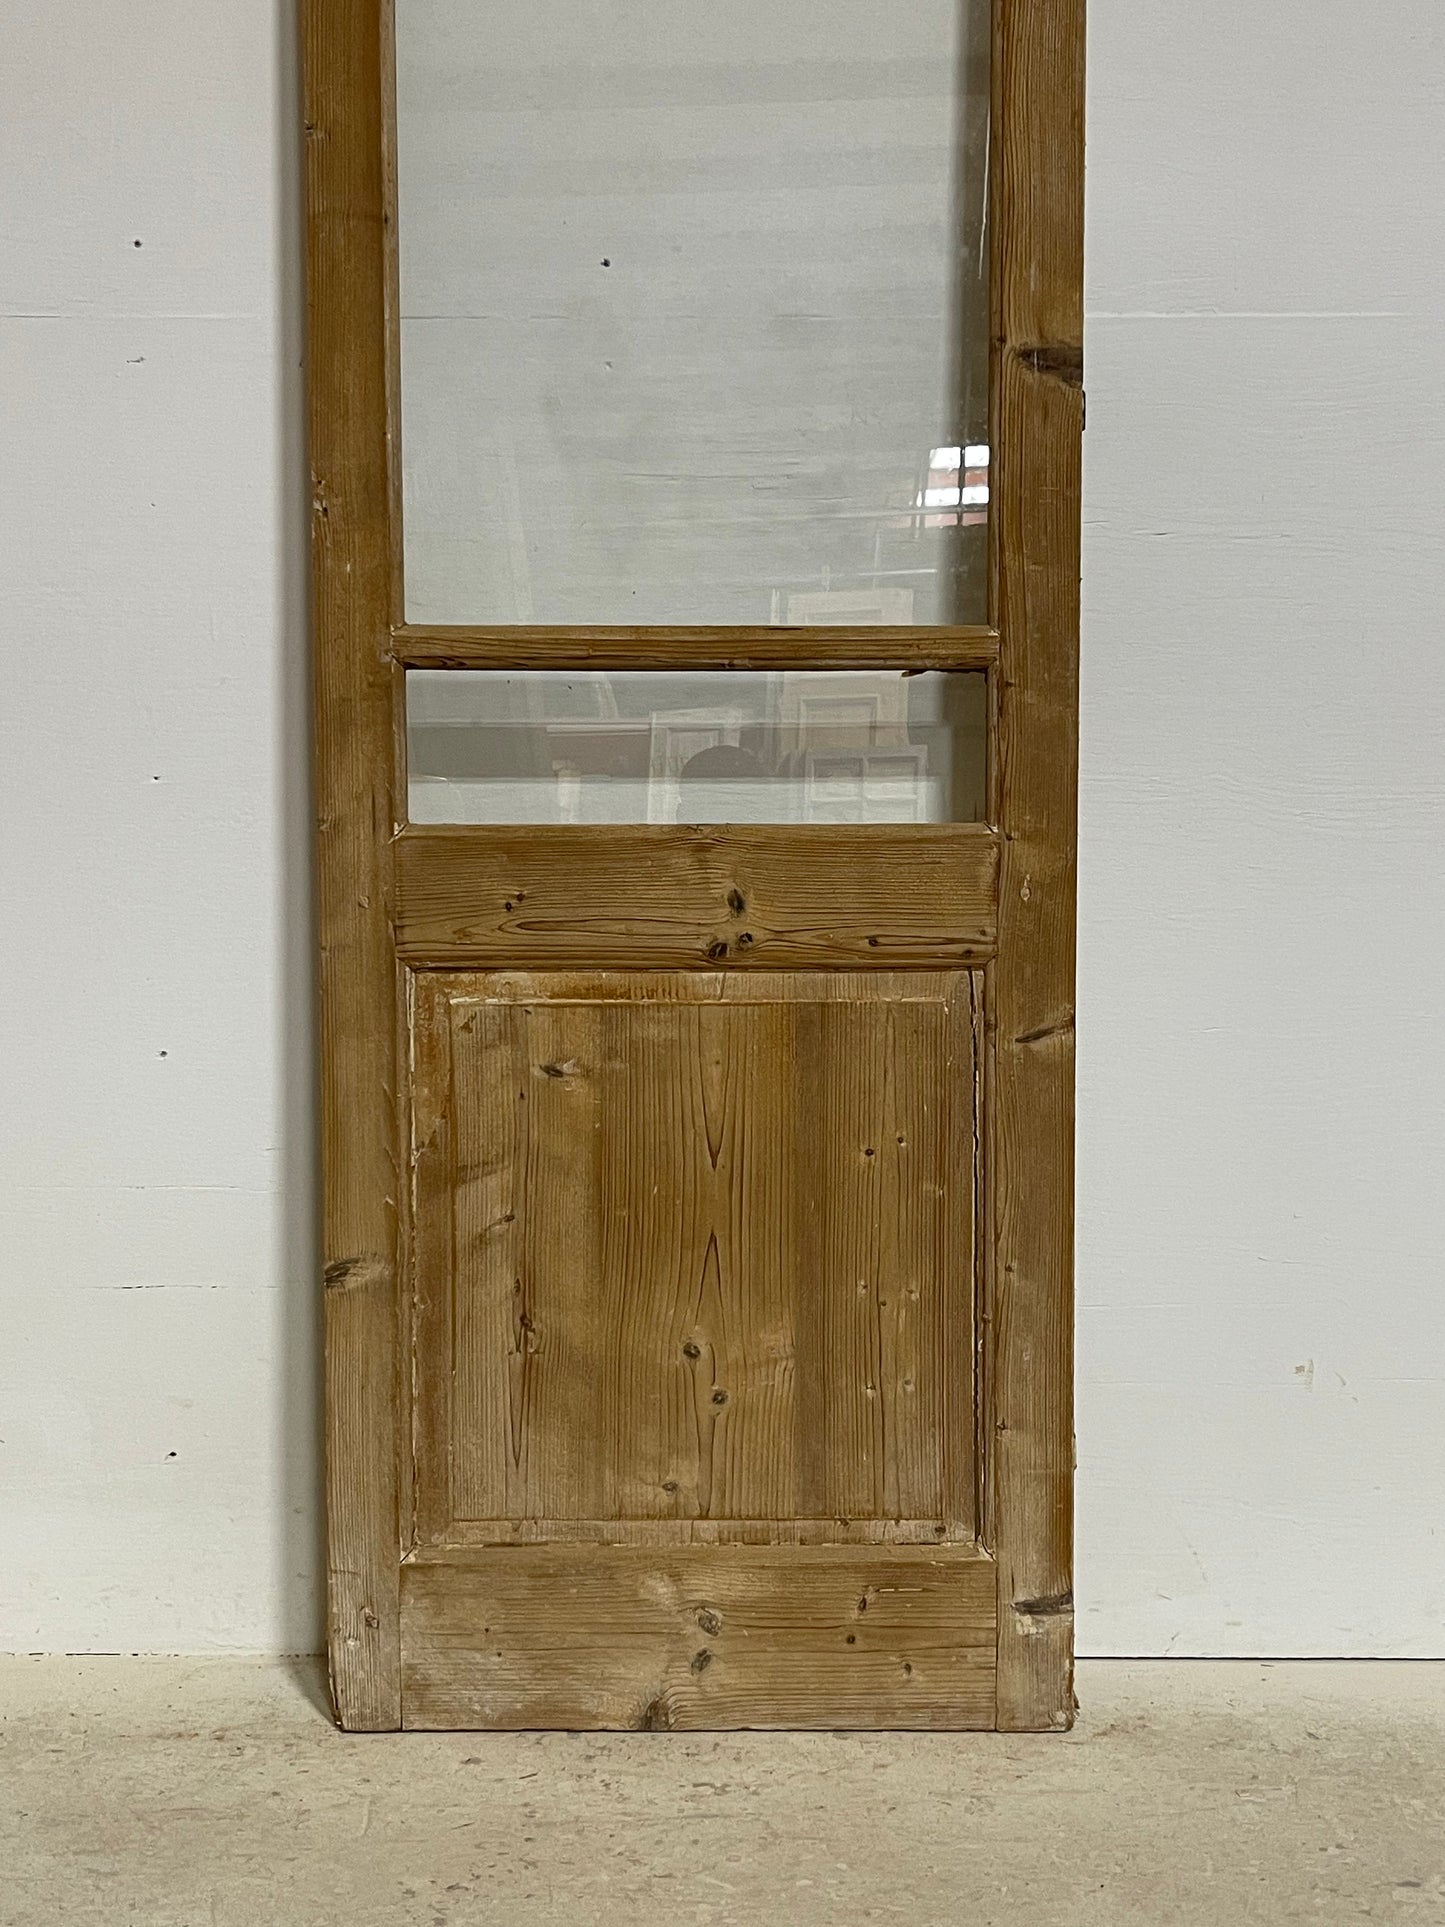 Antique French panel door with glass (85.75x25.5) G1605s